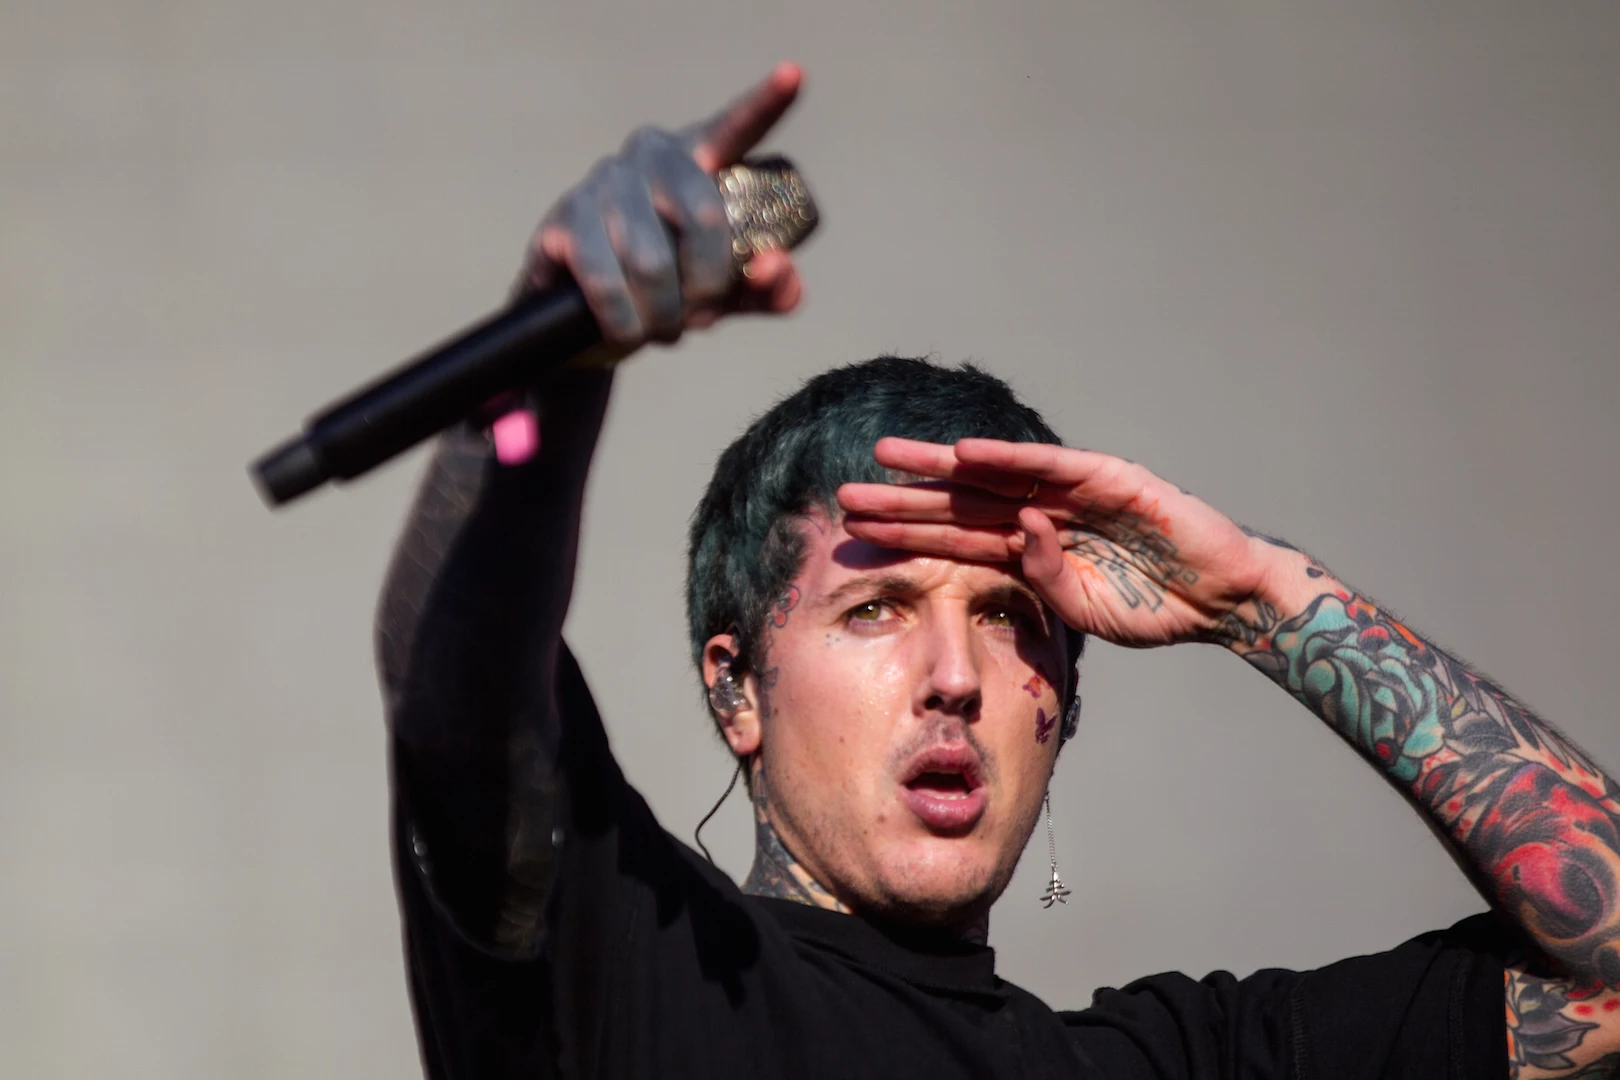 BMTH's Oli Sykes Asks if Metal Sounding Teaser Is 'Too Crazy'